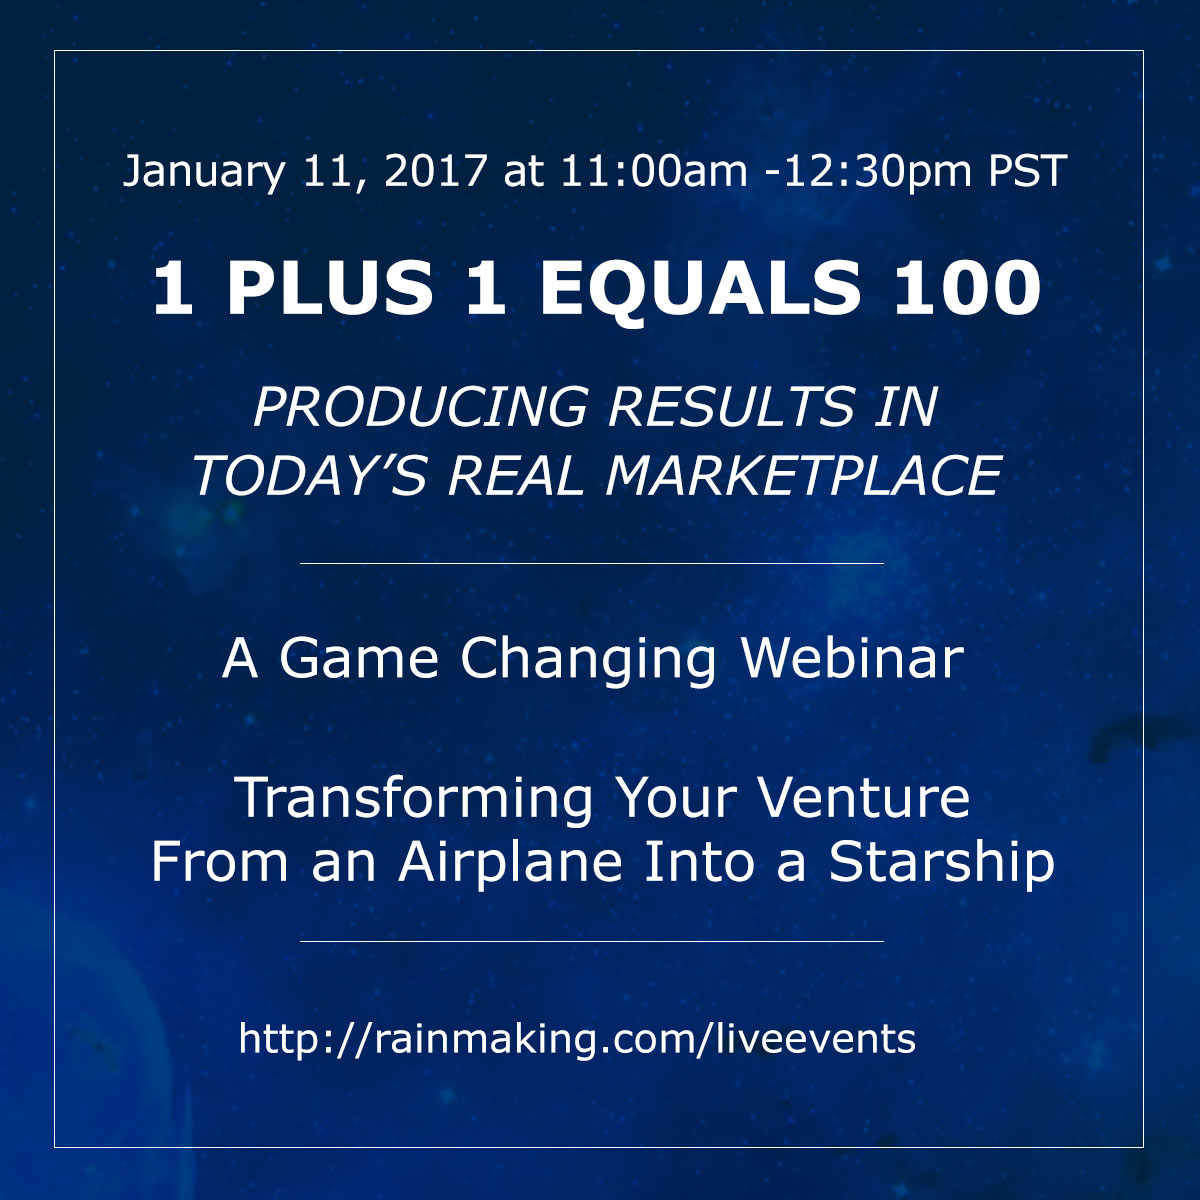 1 Plus 1 Equals 100 - Producing Results in Today's Real Marketplace- A Game Changing Webinar Transforming Your Venture from an Airplane into a Starship